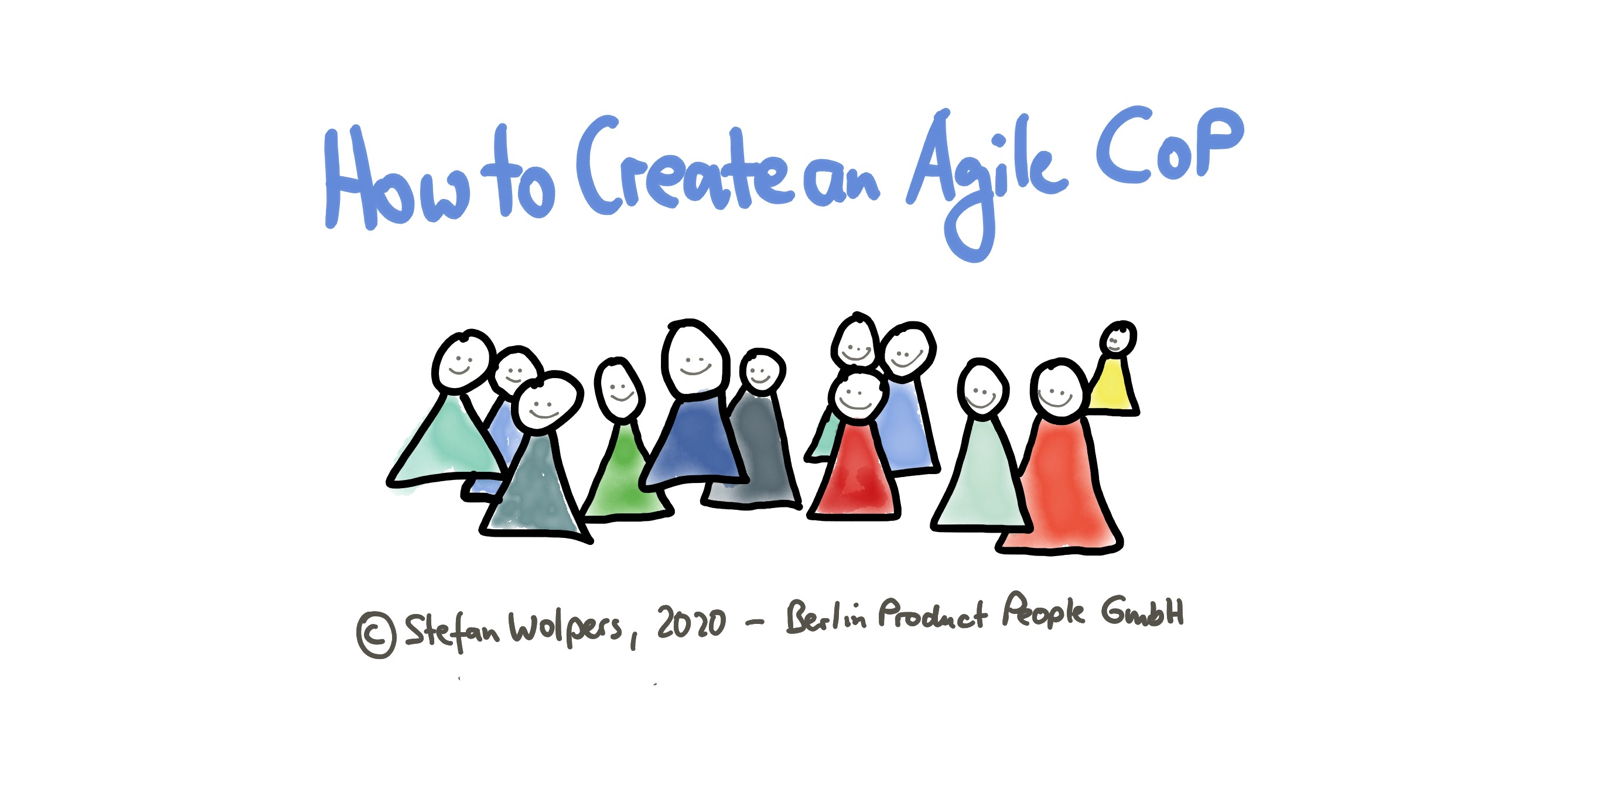 How to Create an Agile Community of Practice — Berlin Product People GmbH